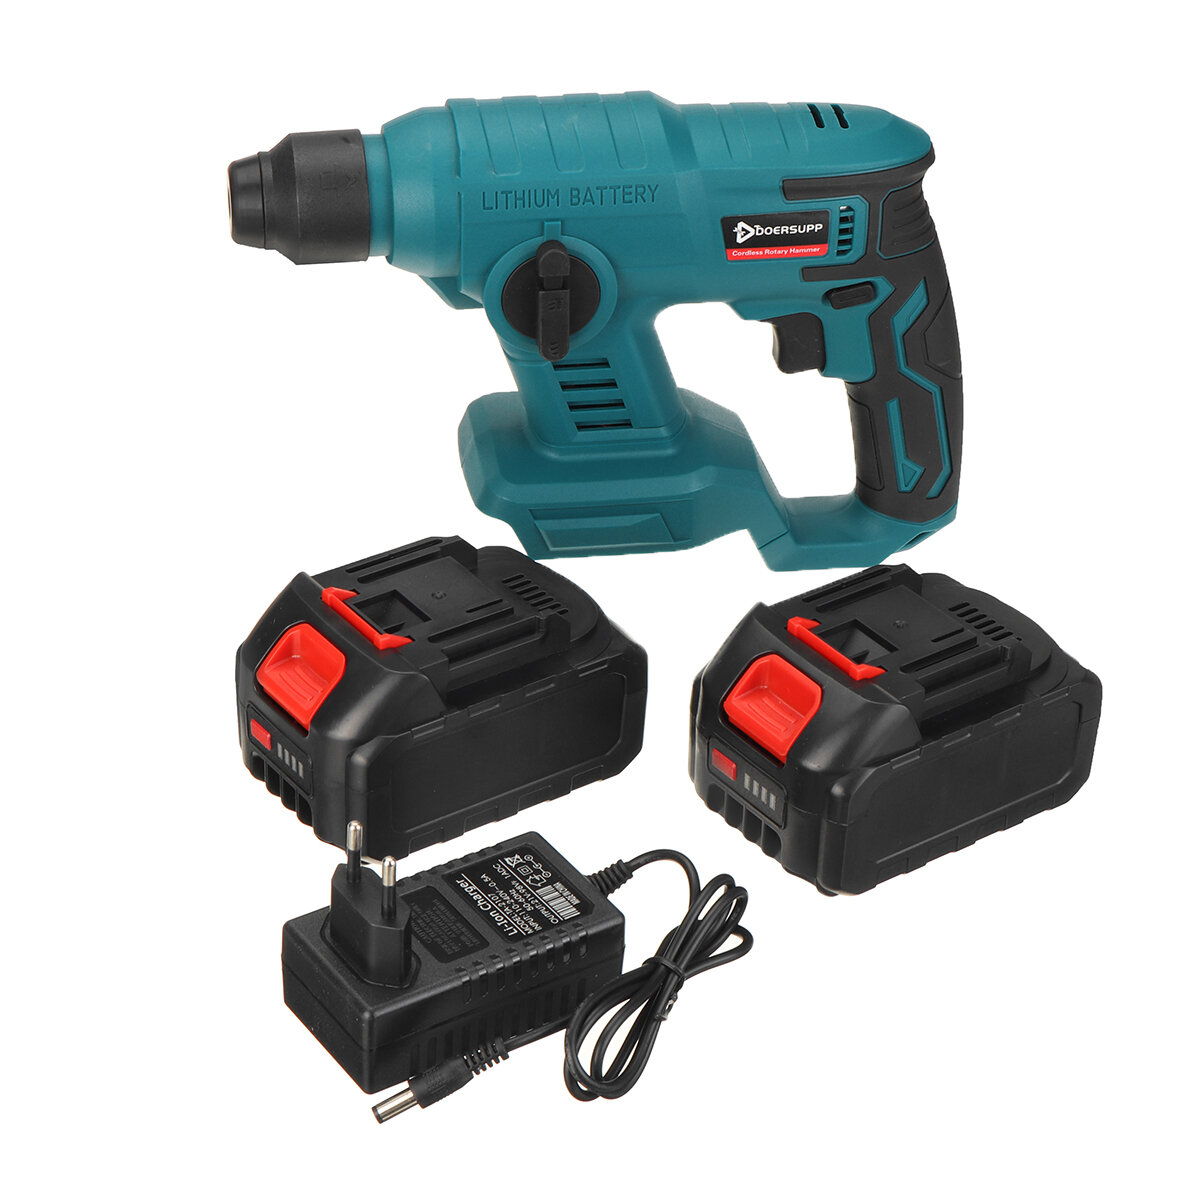 

Doersupp Brushles Cordless Electric Rotary Hammer Drill battery Indicator Rechargeable Impact Hammer Drill Tool W/ 1/2 B